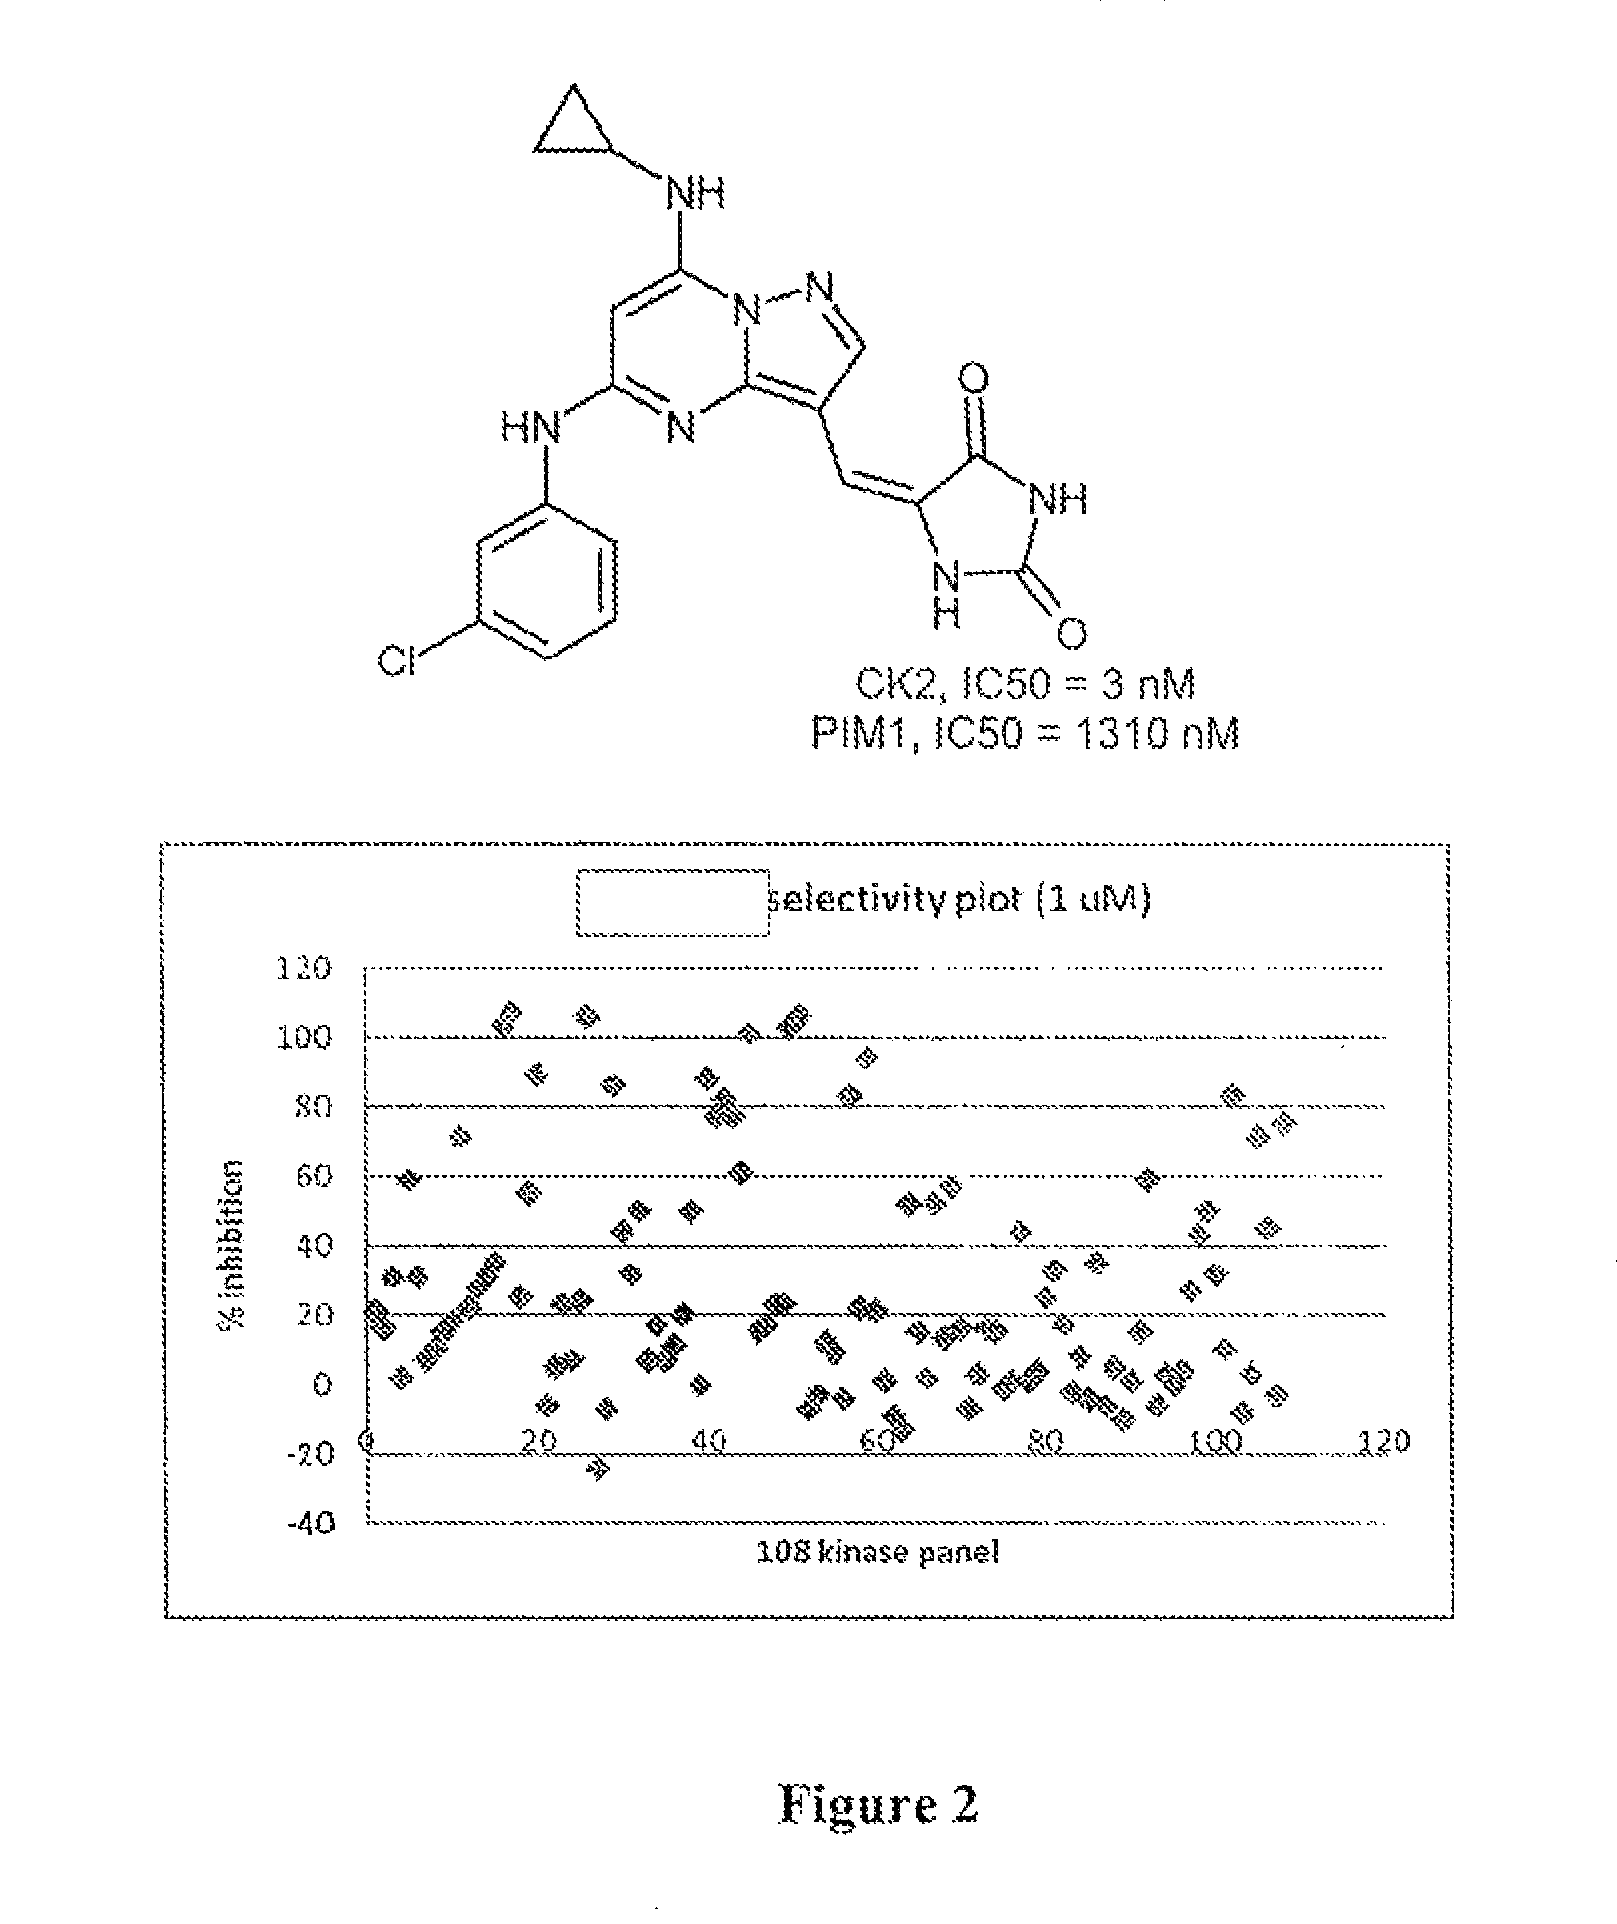 Pyrazolopyrimidines and related heterocycles as CK2 inhibitors